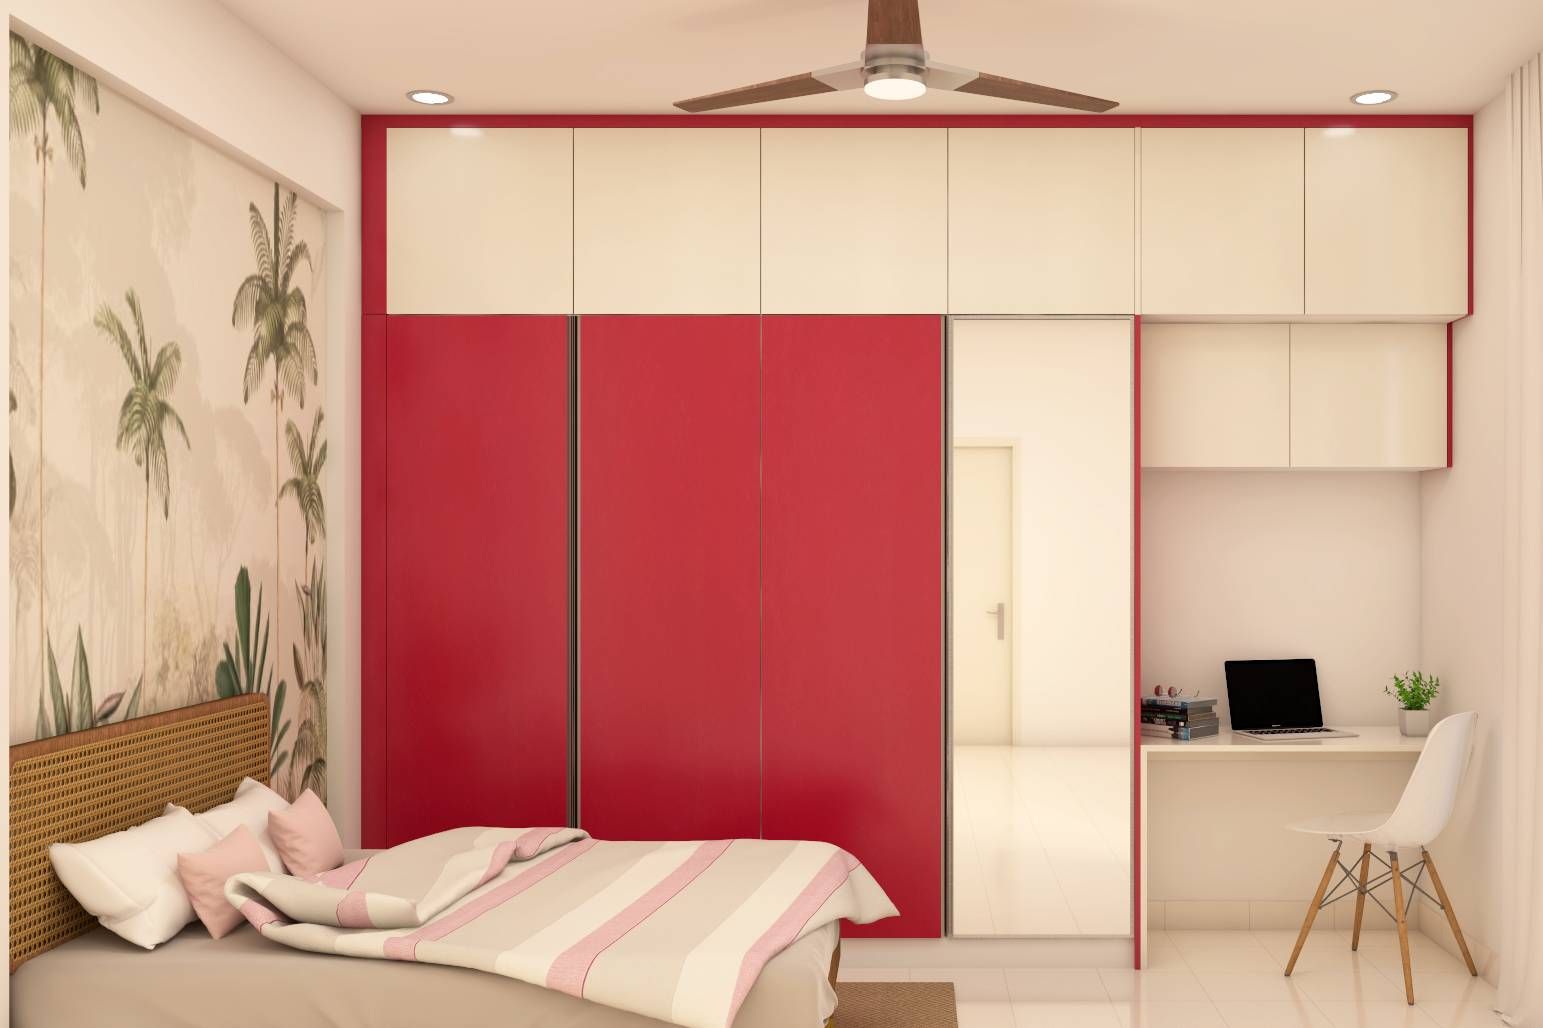 Contemporary 4-Door Wardrobe Design With A Mirror On The Shutter